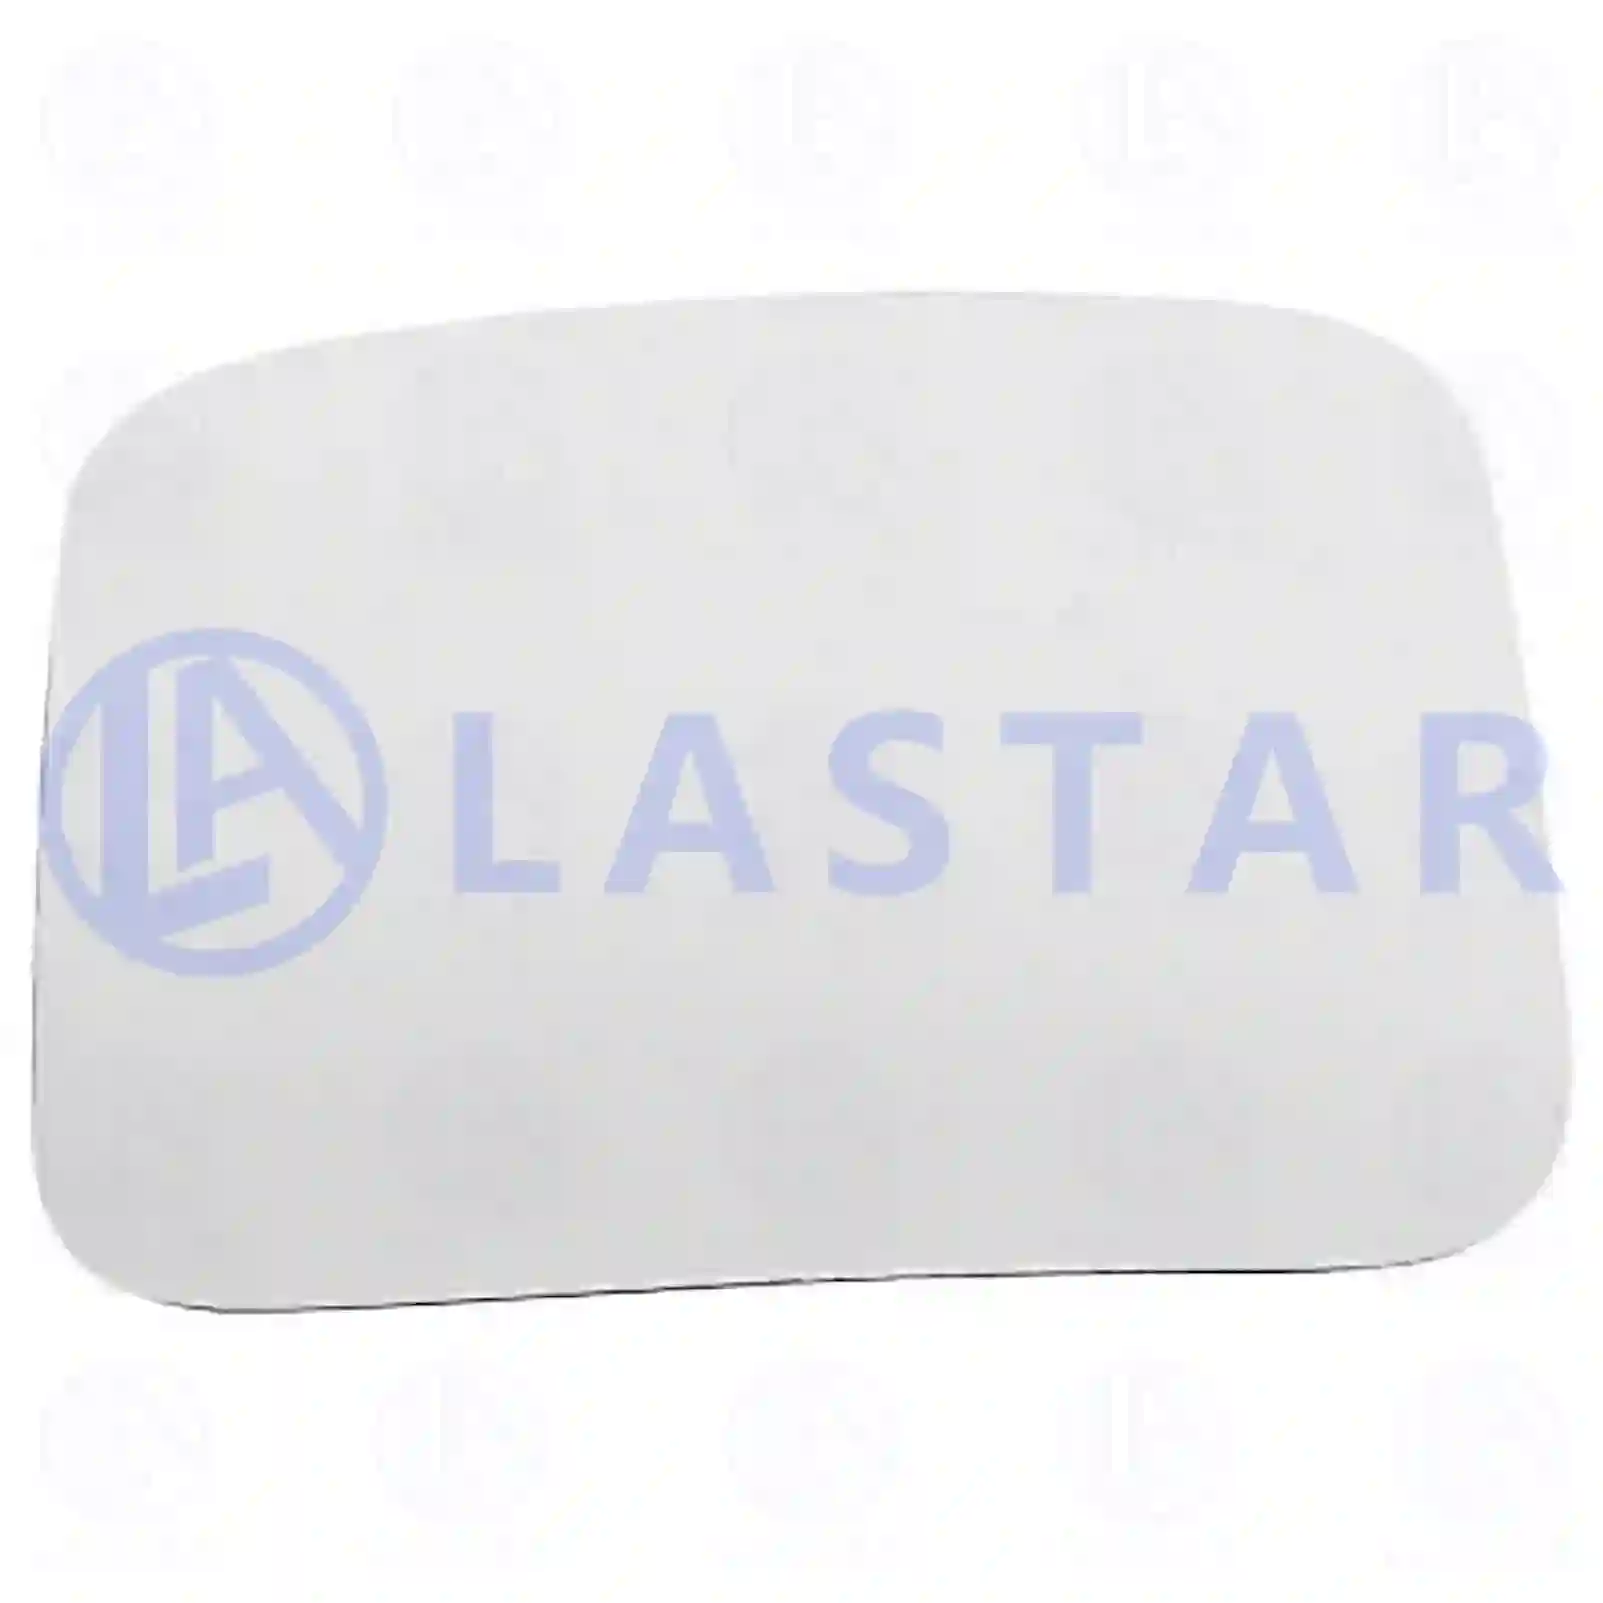 Mirror glass, wide view mirror, heated, 77719970, 0699854, 699854, 1699017 ||  77719970 Lastar Spare Part | Truck Spare Parts, Auotomotive Spare Parts Mirror glass, wide view mirror, heated, 77719970, 0699854, 699854, 1699017 ||  77719970 Lastar Spare Part | Truck Spare Parts, Auotomotive Spare Parts